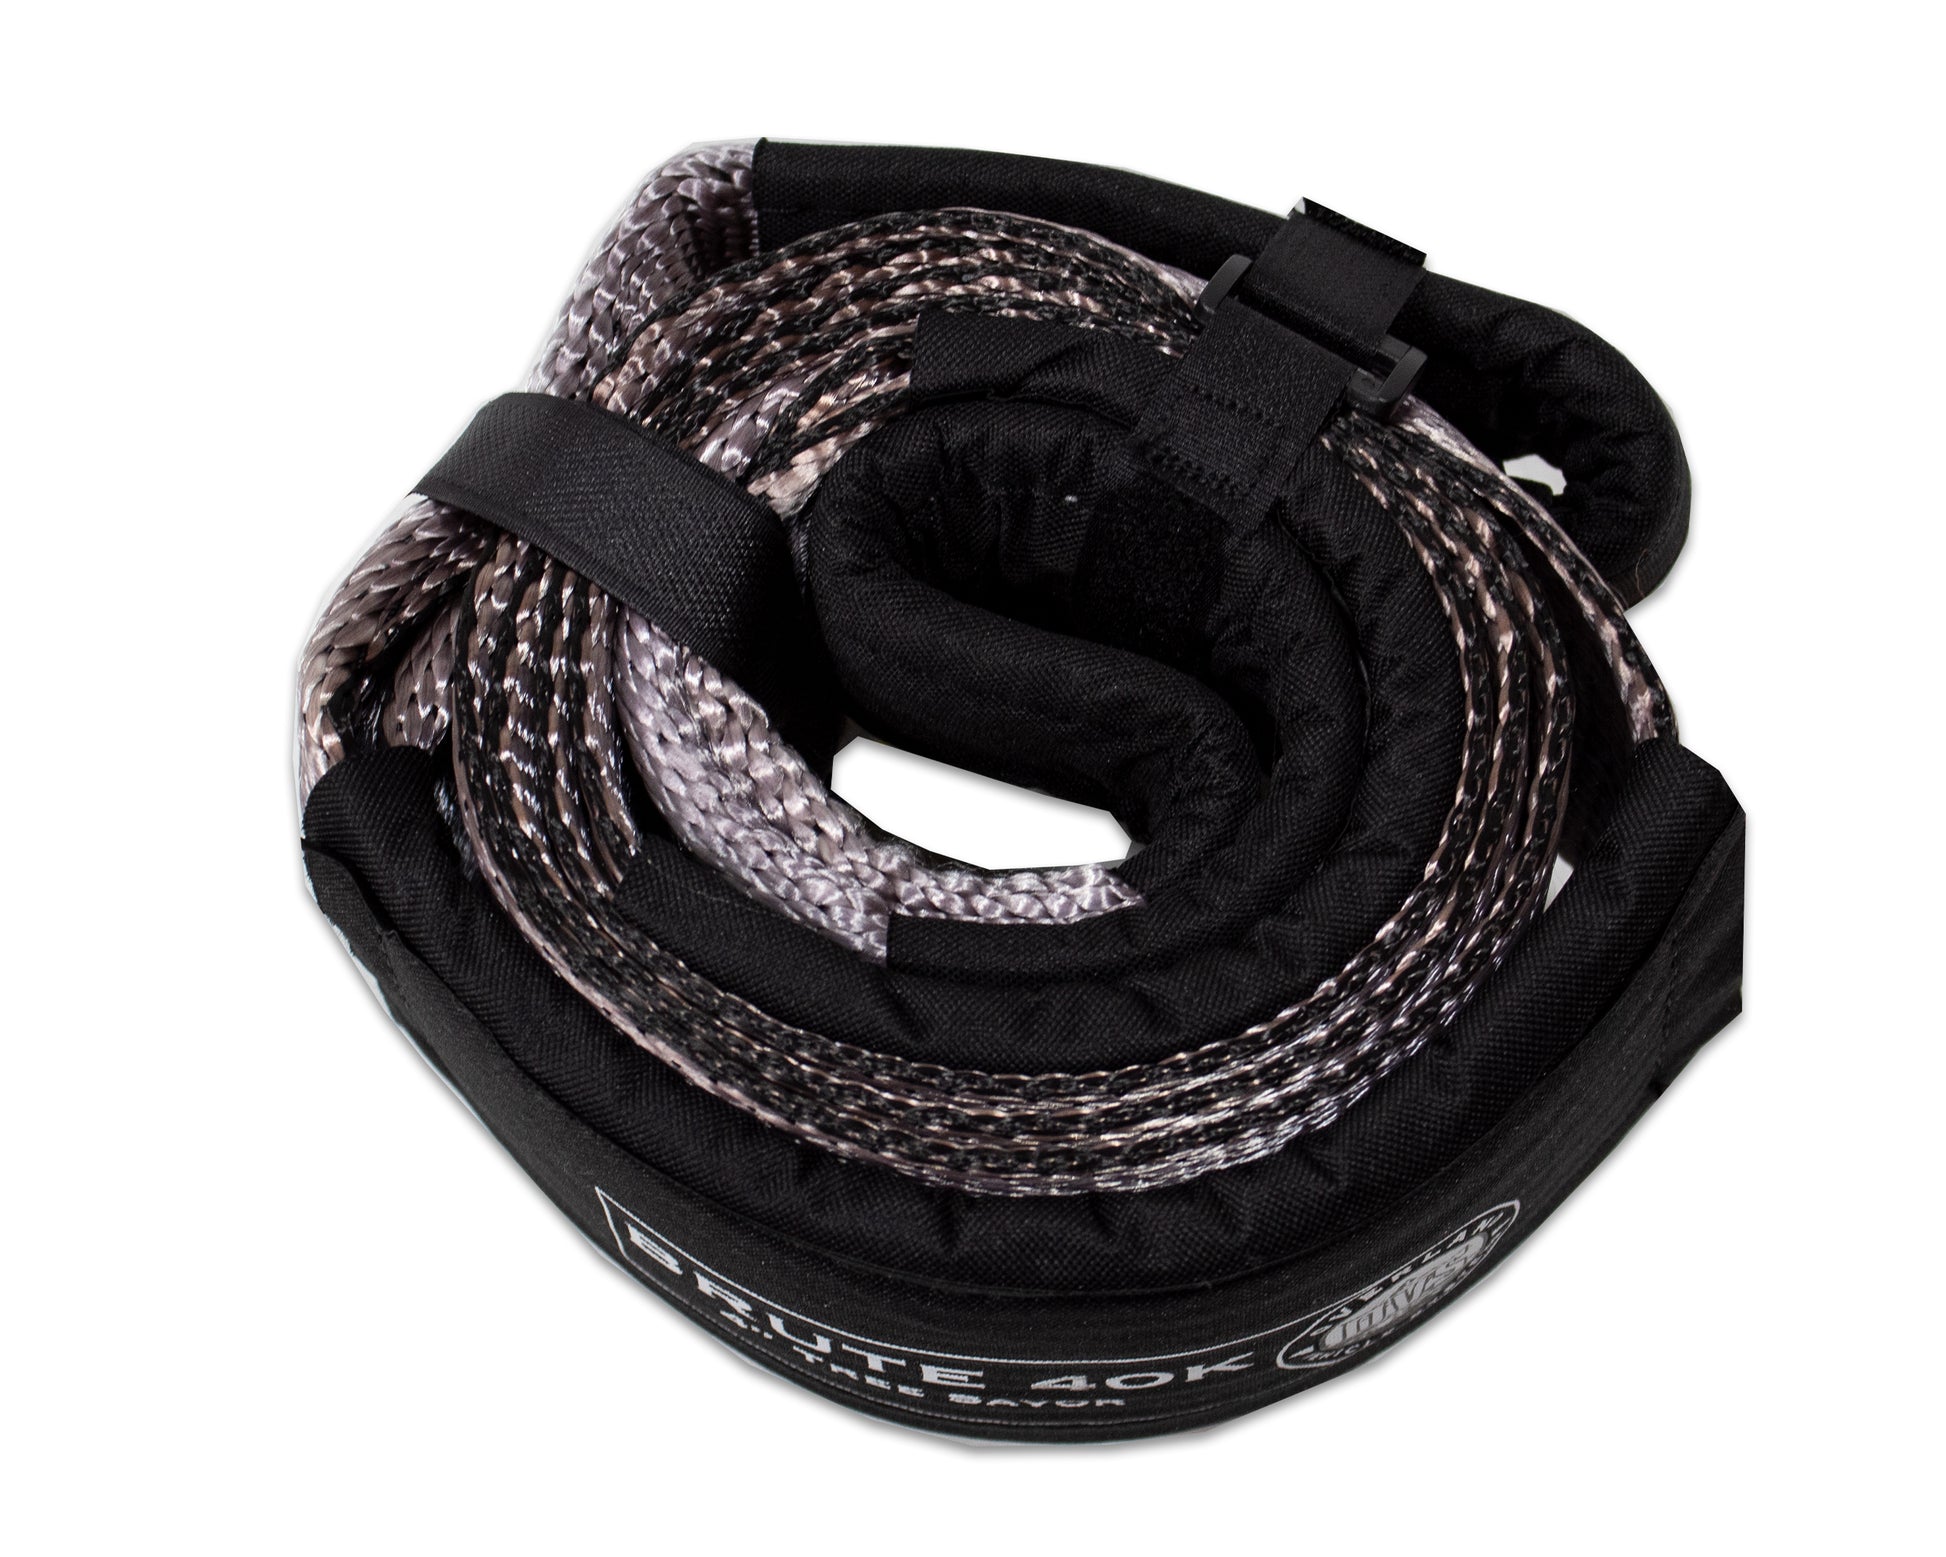 We start with high quality tightly woven synthetic fiber that feature double looped ends with a protective sleeve that are double stitched that will not stretch or deform. Each strap is engineered and tested statically to surpass breaking strength requirements to ensure you have the safest product available.